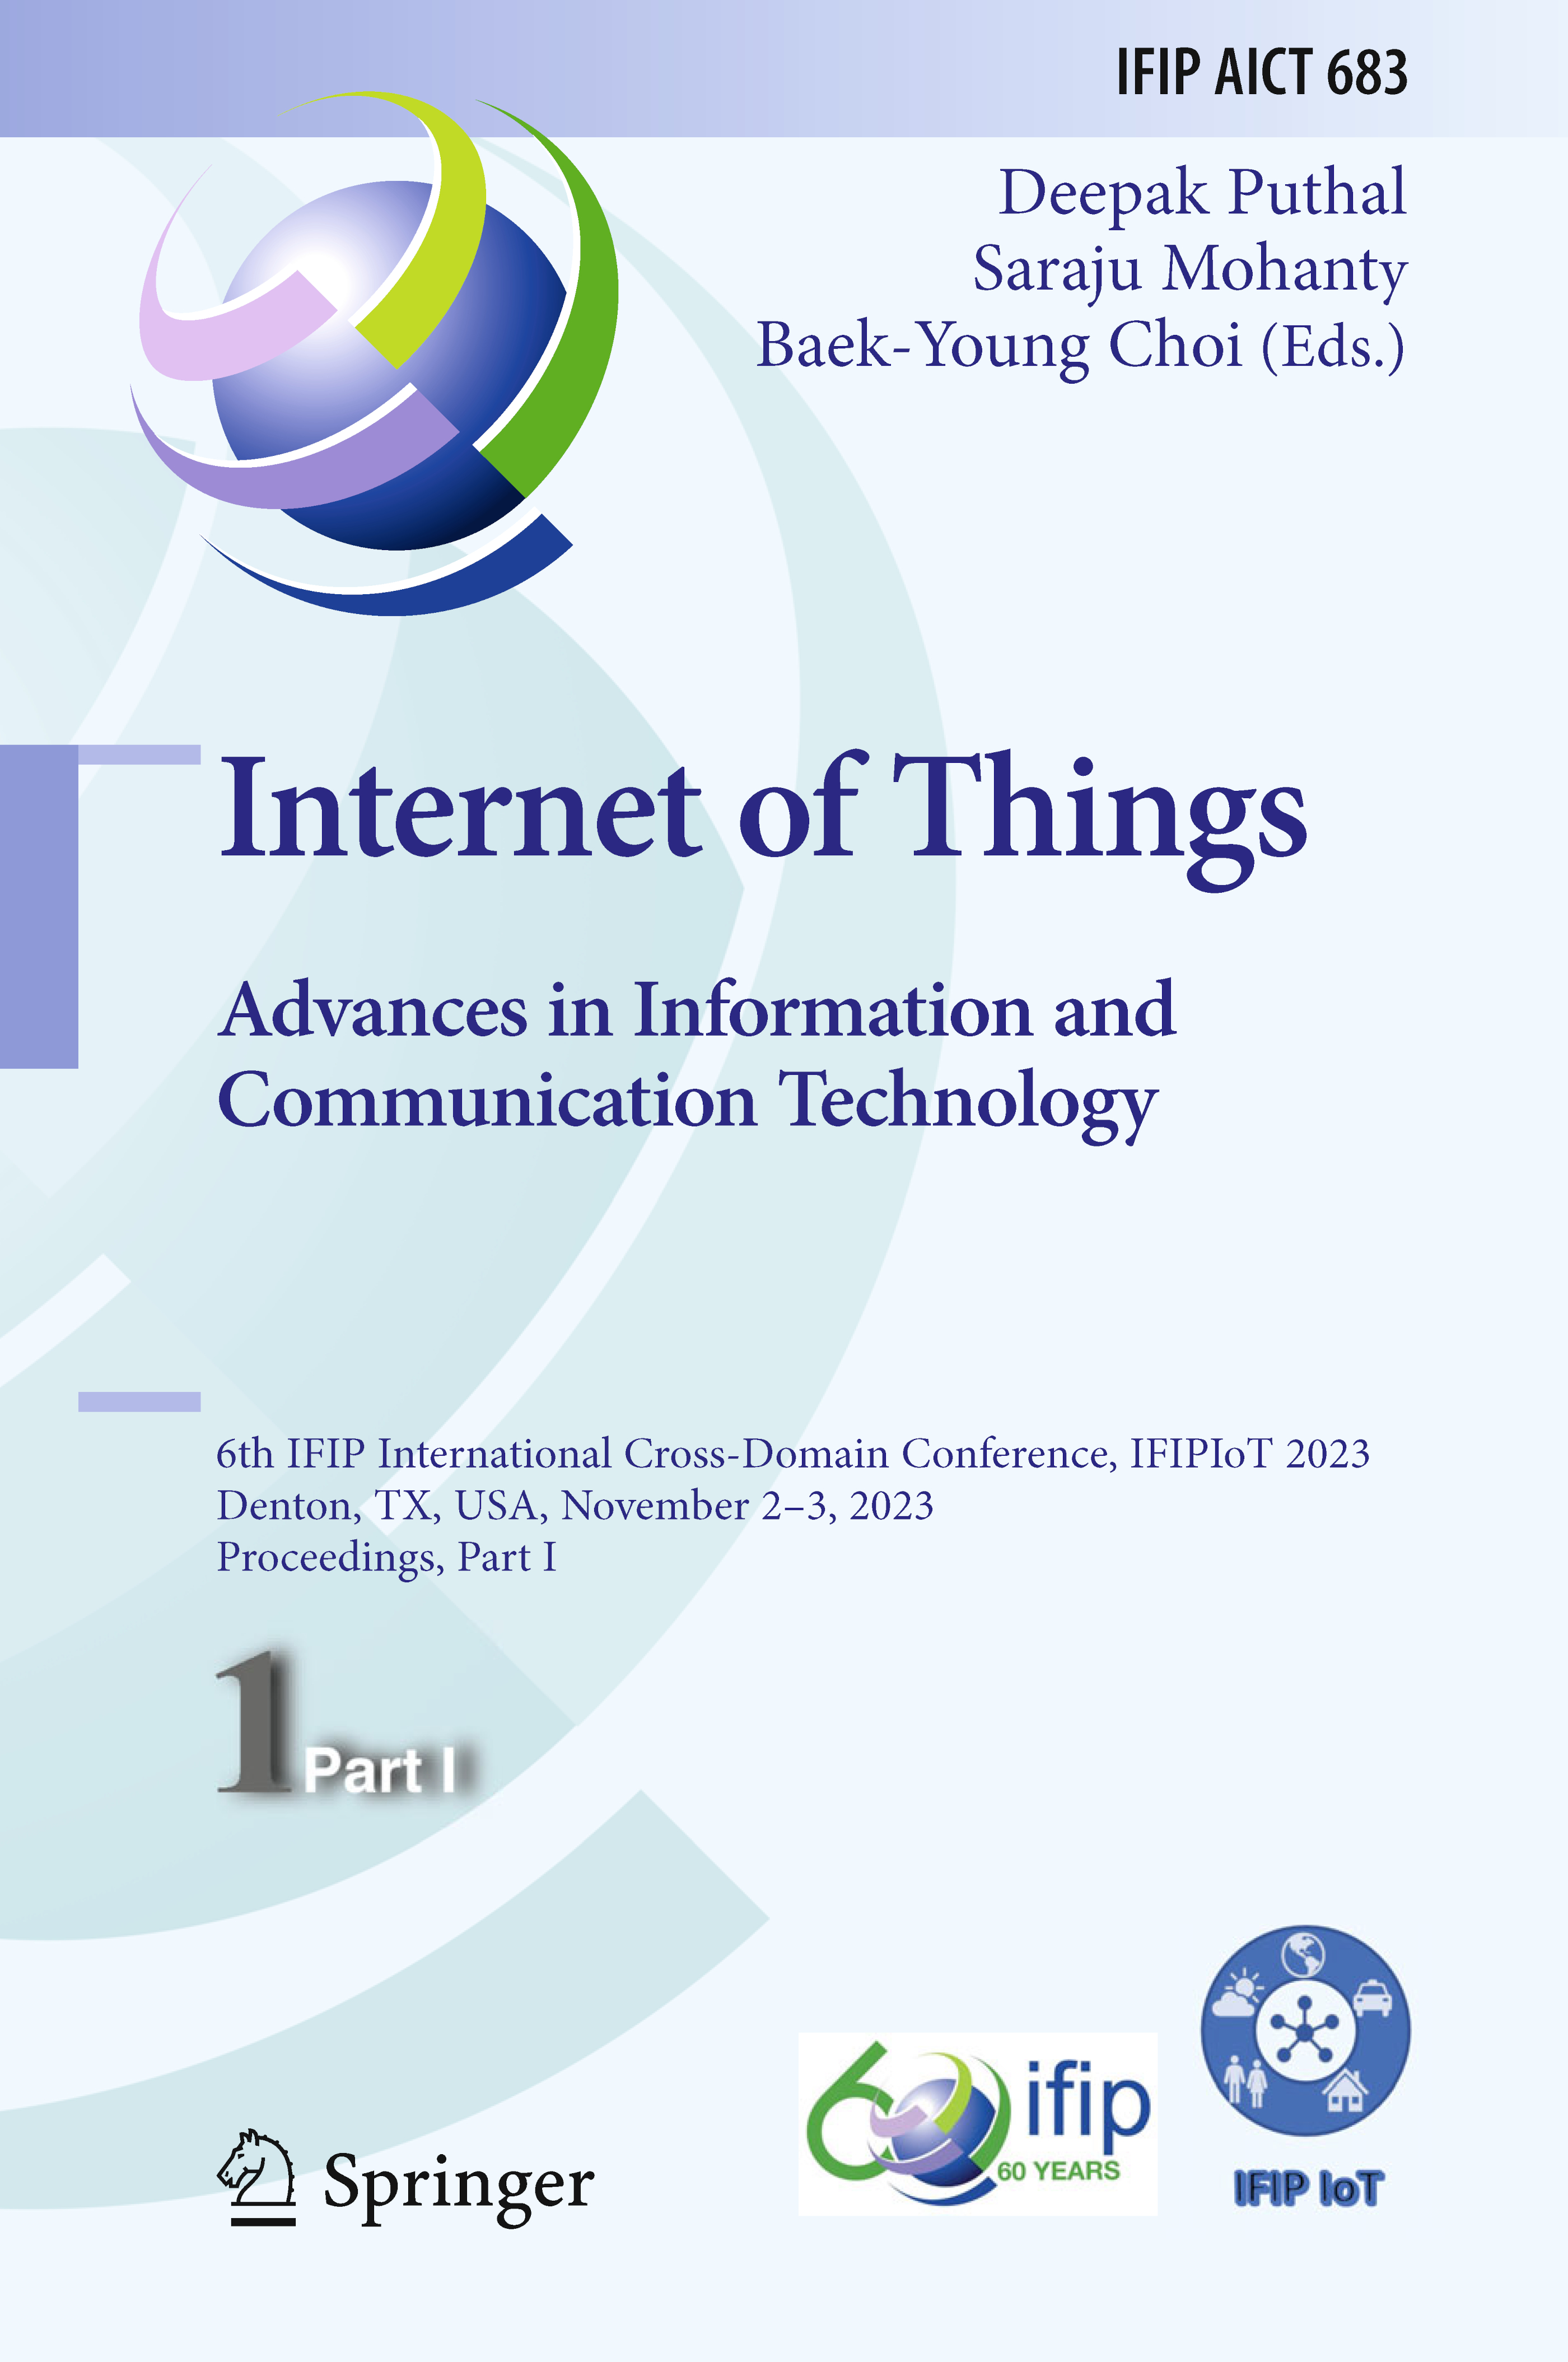 Proceedings of 6th IFIP International Cross-Domain Conference - IFIP-IoT 2023 - Part I, Springer Cham, 2024, ISBN: 978-3-031-45880-4